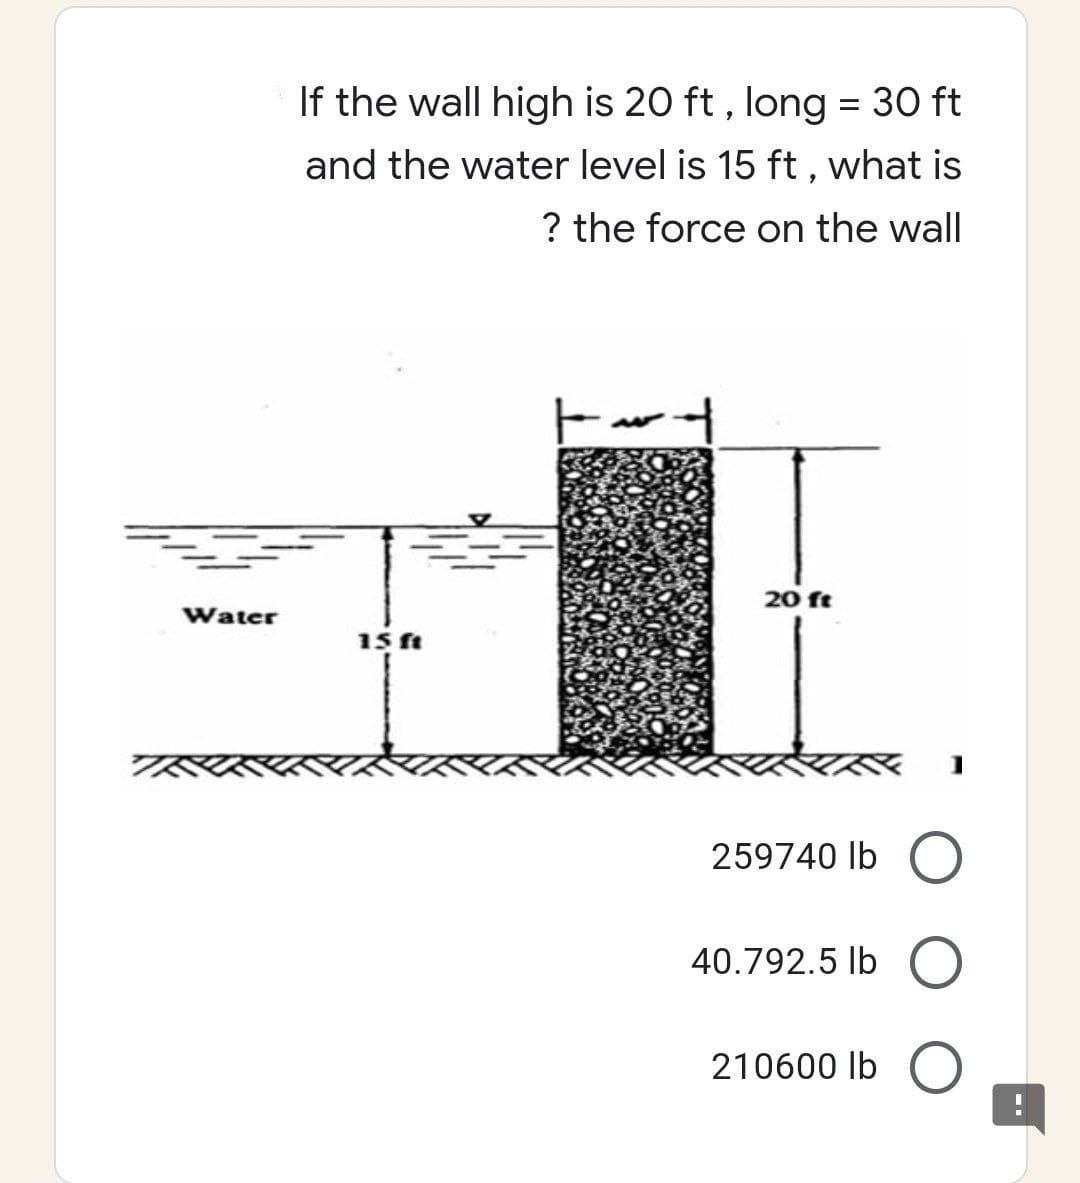 Water
If the wall high is 20 ft, long = 30 ft
and the water level is 15 ft, what is
? the force on the wall
20 ft
15 ft
259740 lb
O
40.792.5 lb O
210600 lb
O